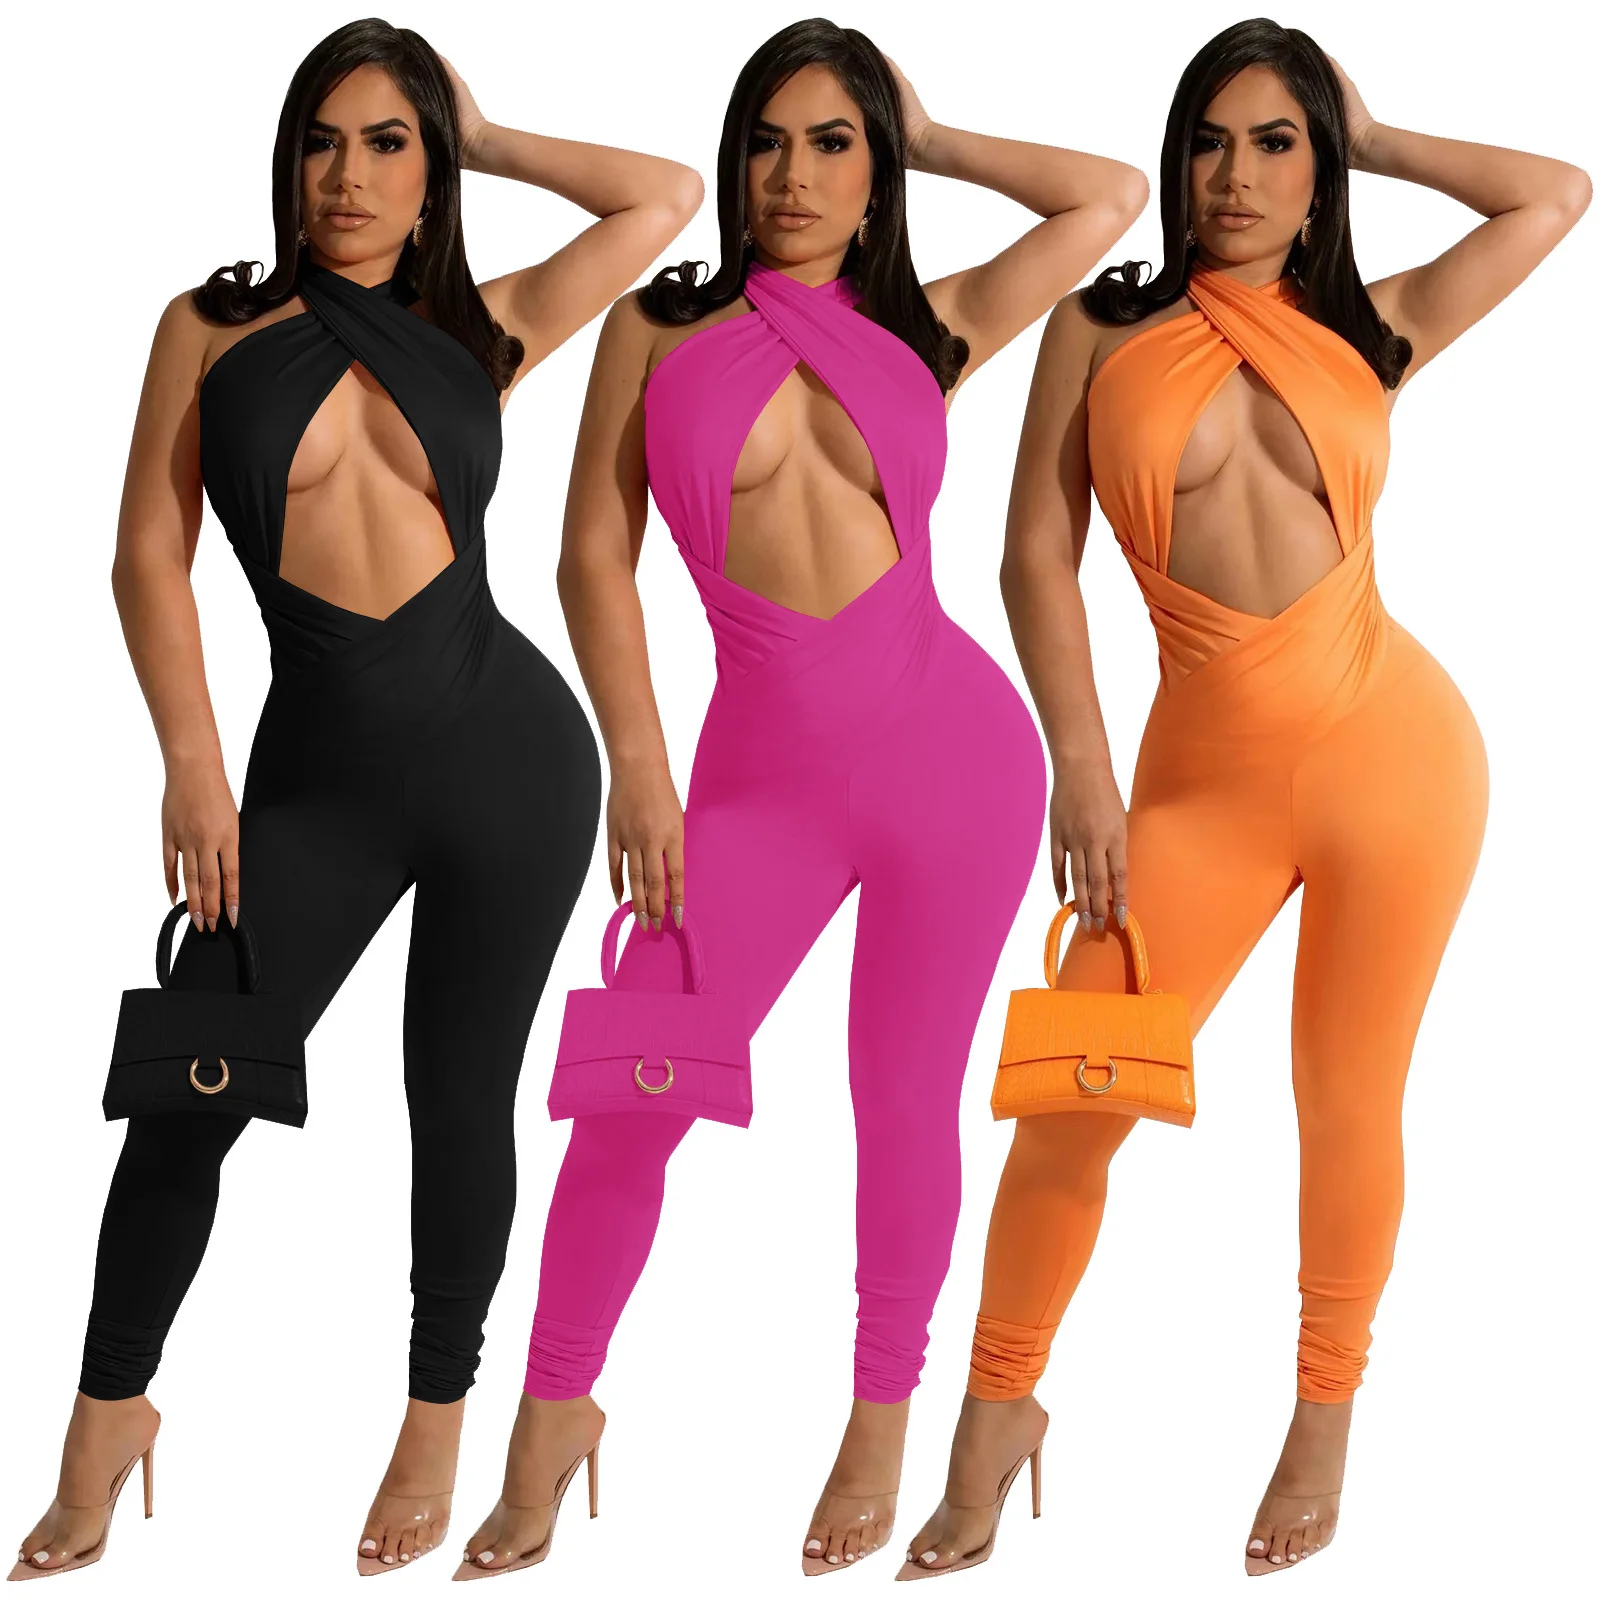 

2022 New Arrivals Fashion Women Sexy Front Hollow Out Sleeveless Backless Slim Solid Stacked Jumpsuit, Picture show